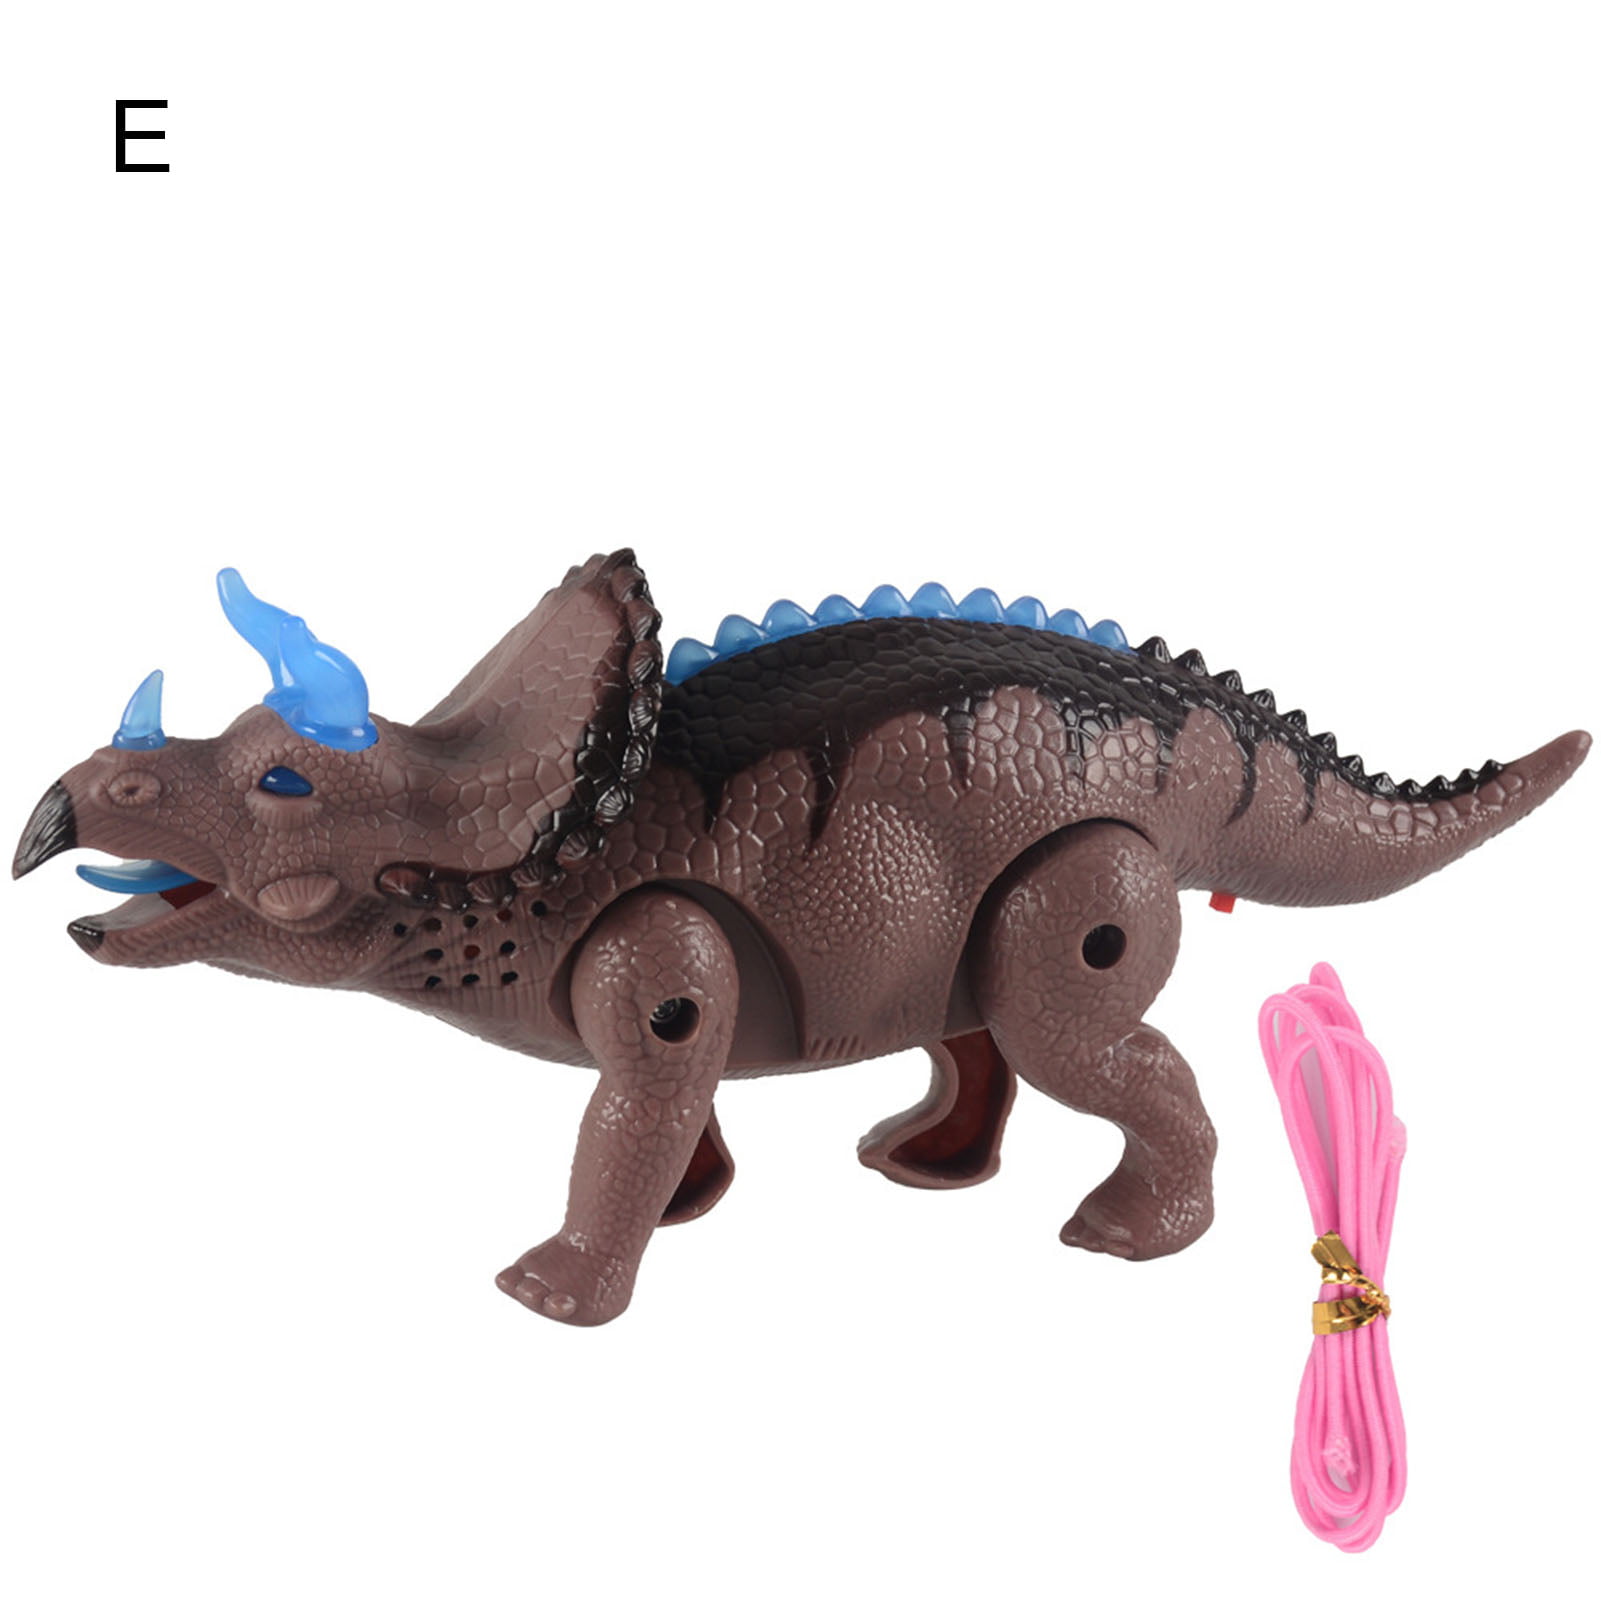 Details about   Dinosaur Toys Figures Real Plastic Dino T-Rex Interactive Sounds Book Kids Gift 